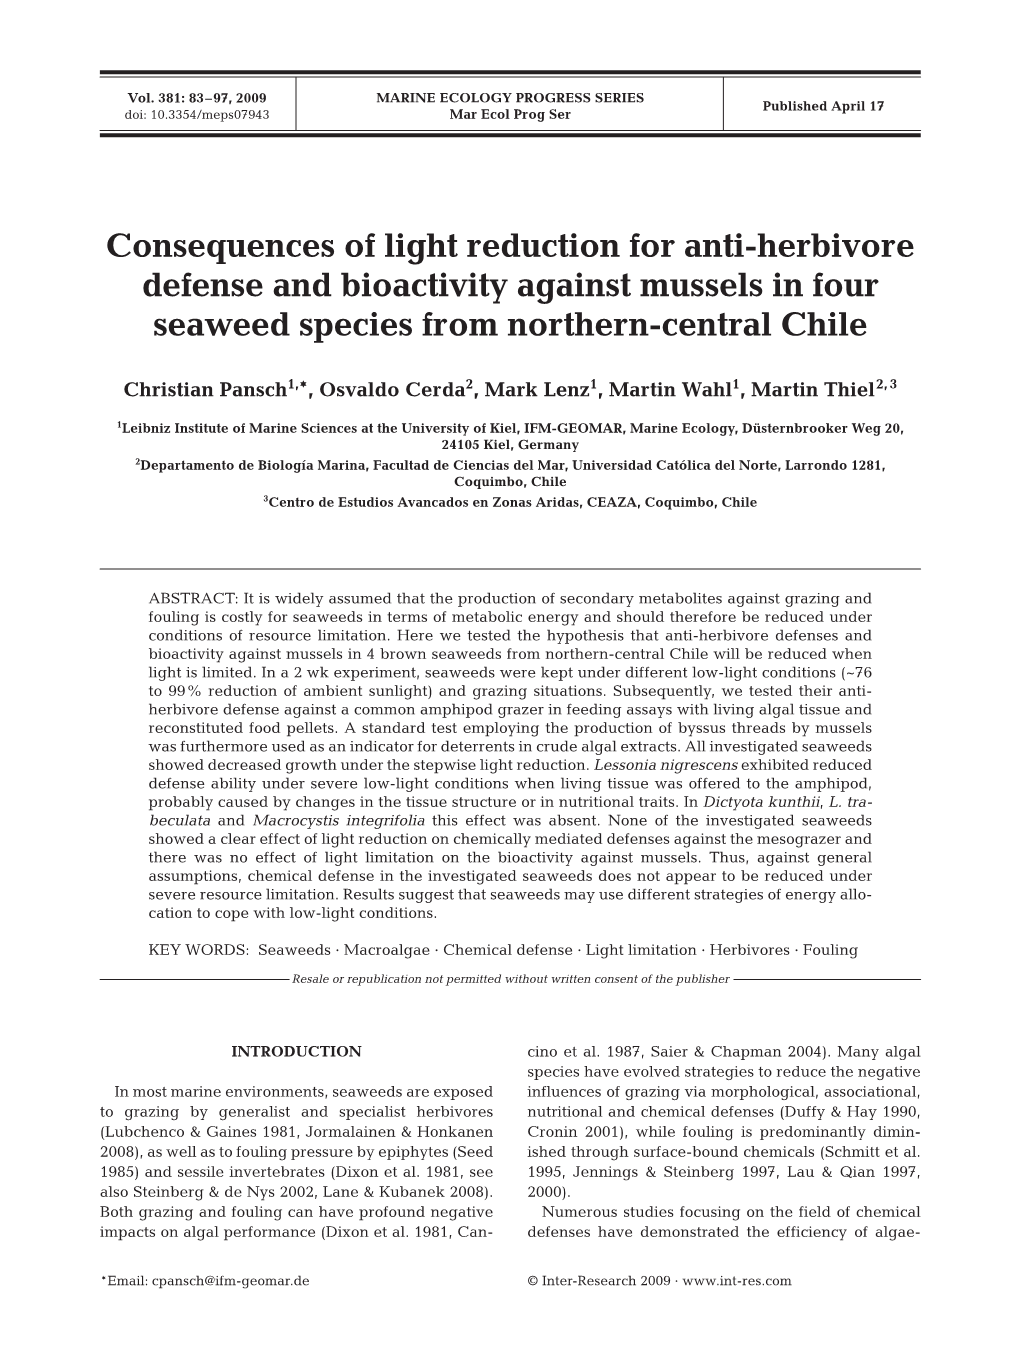 Consequences of Light Reduction for Anti-Herbivore Defense and Bioactivity Against Mussels in Four Seaweed Species from Northern-Central Chile